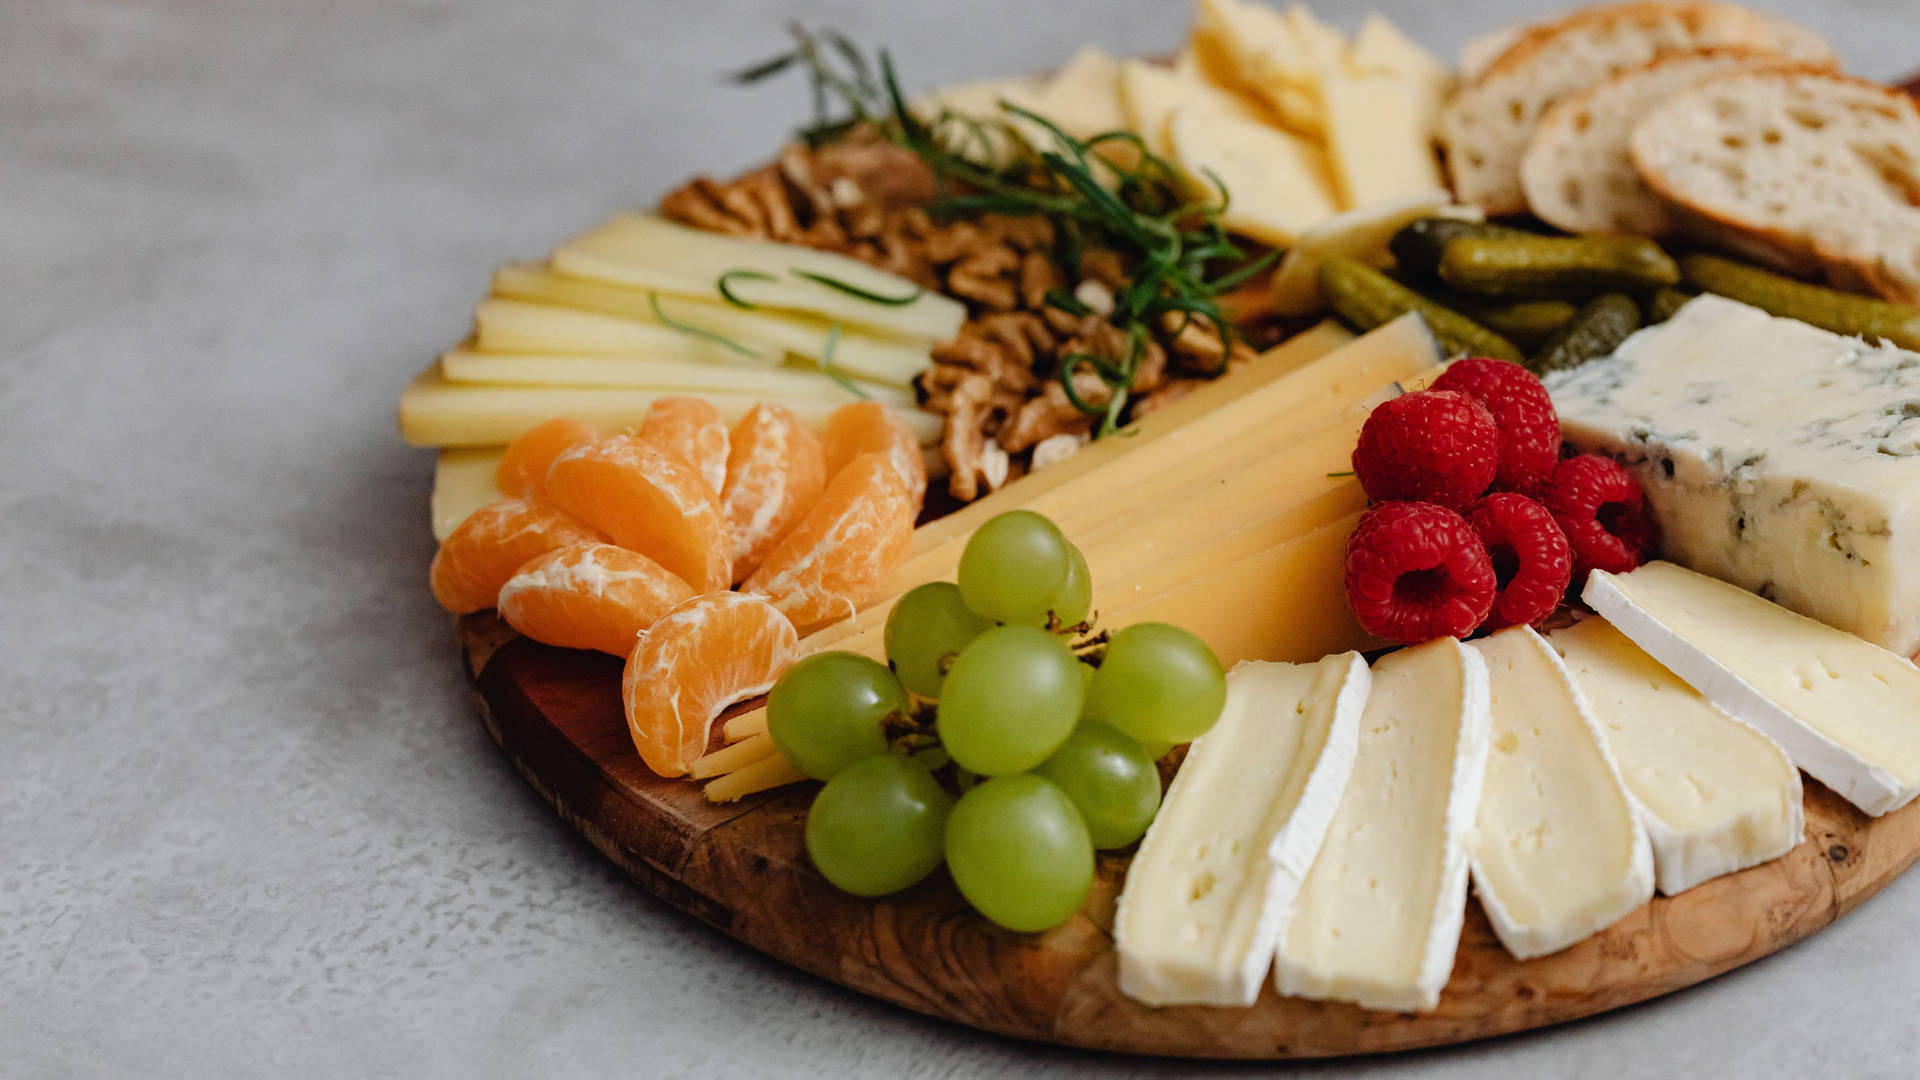 A Platter Of Cheese, Fruit, And Nuts Wallpaper